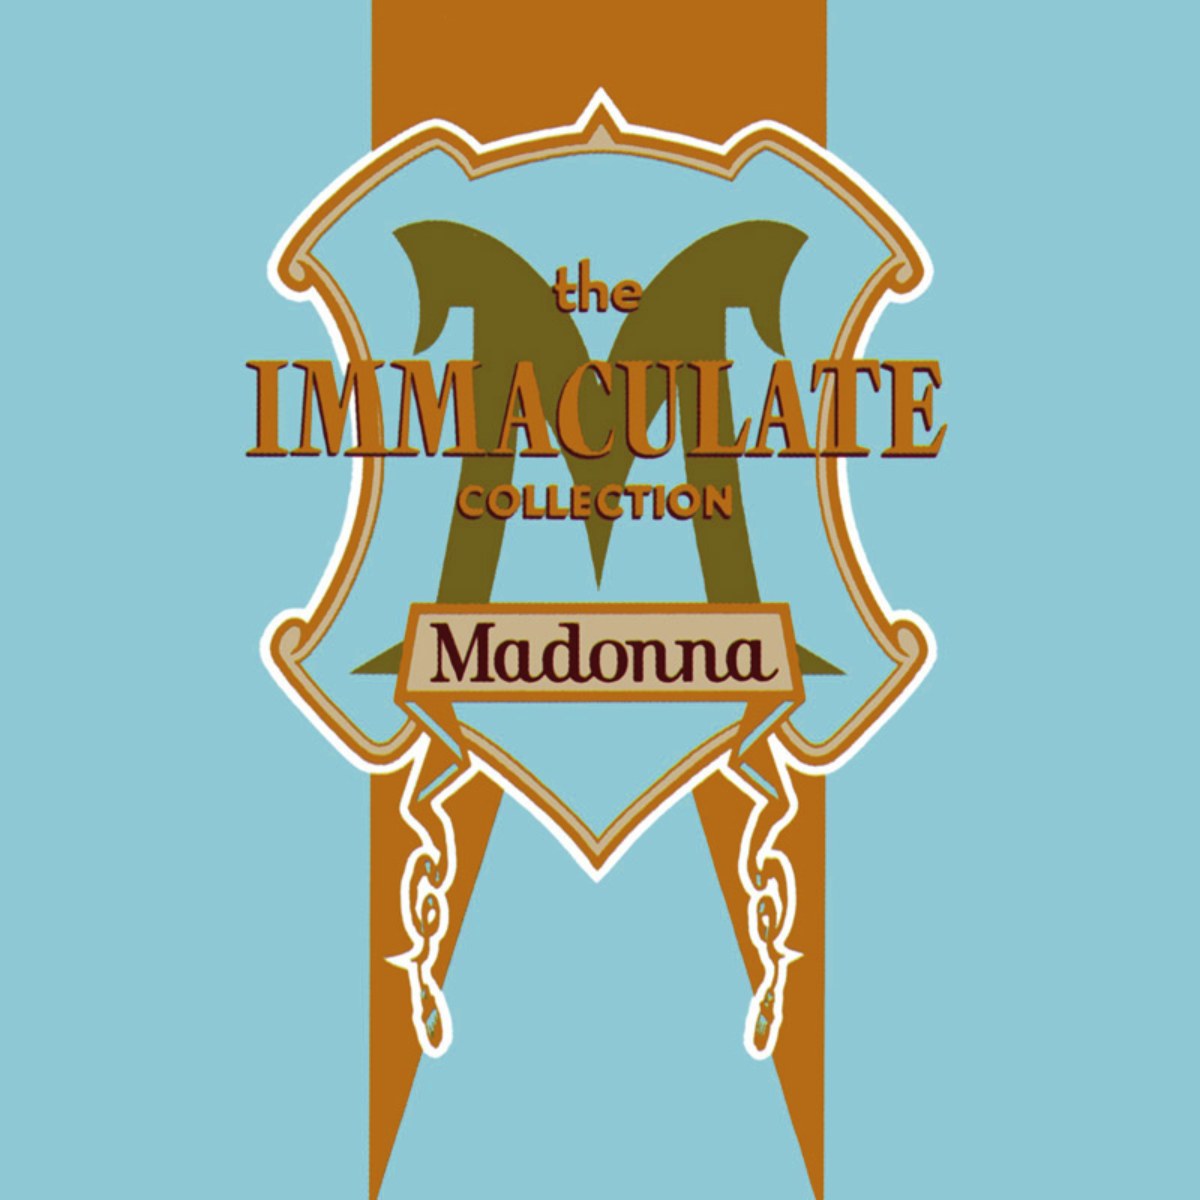 Madonna - "The Immaculate Collection" (1990)